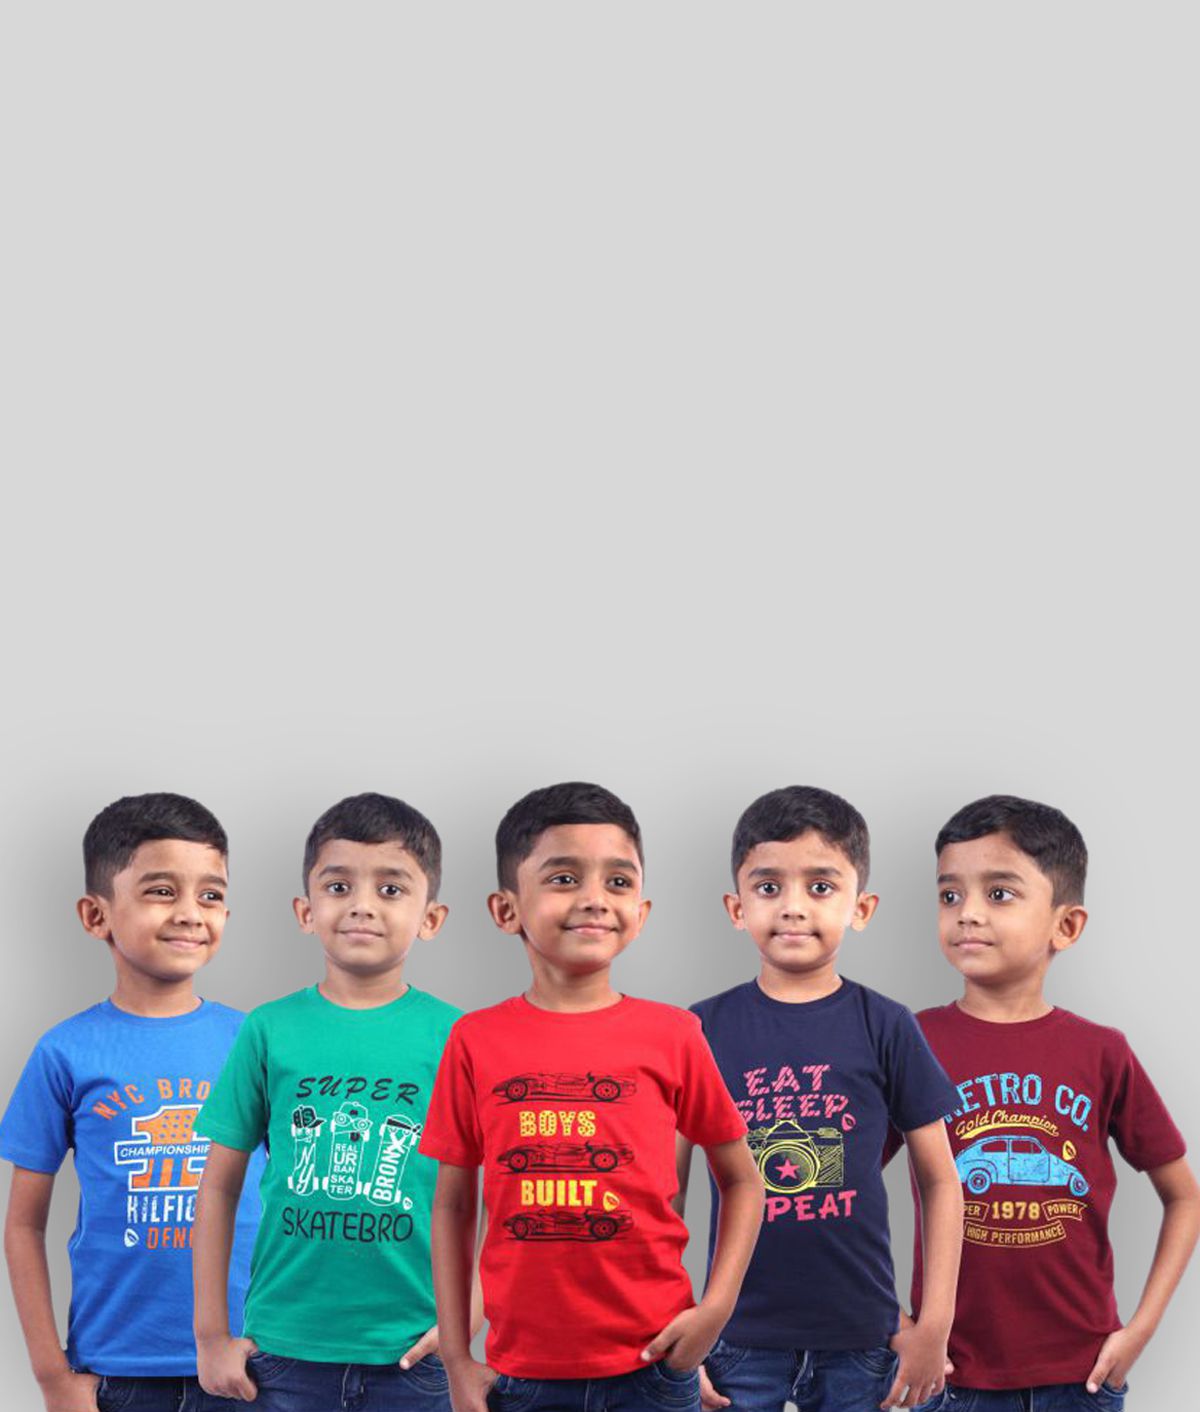     			Soft Apparels Peppy Kid's Printed Cotton T-Shirt (Half sleeve) - Pack of 5 - Combo1